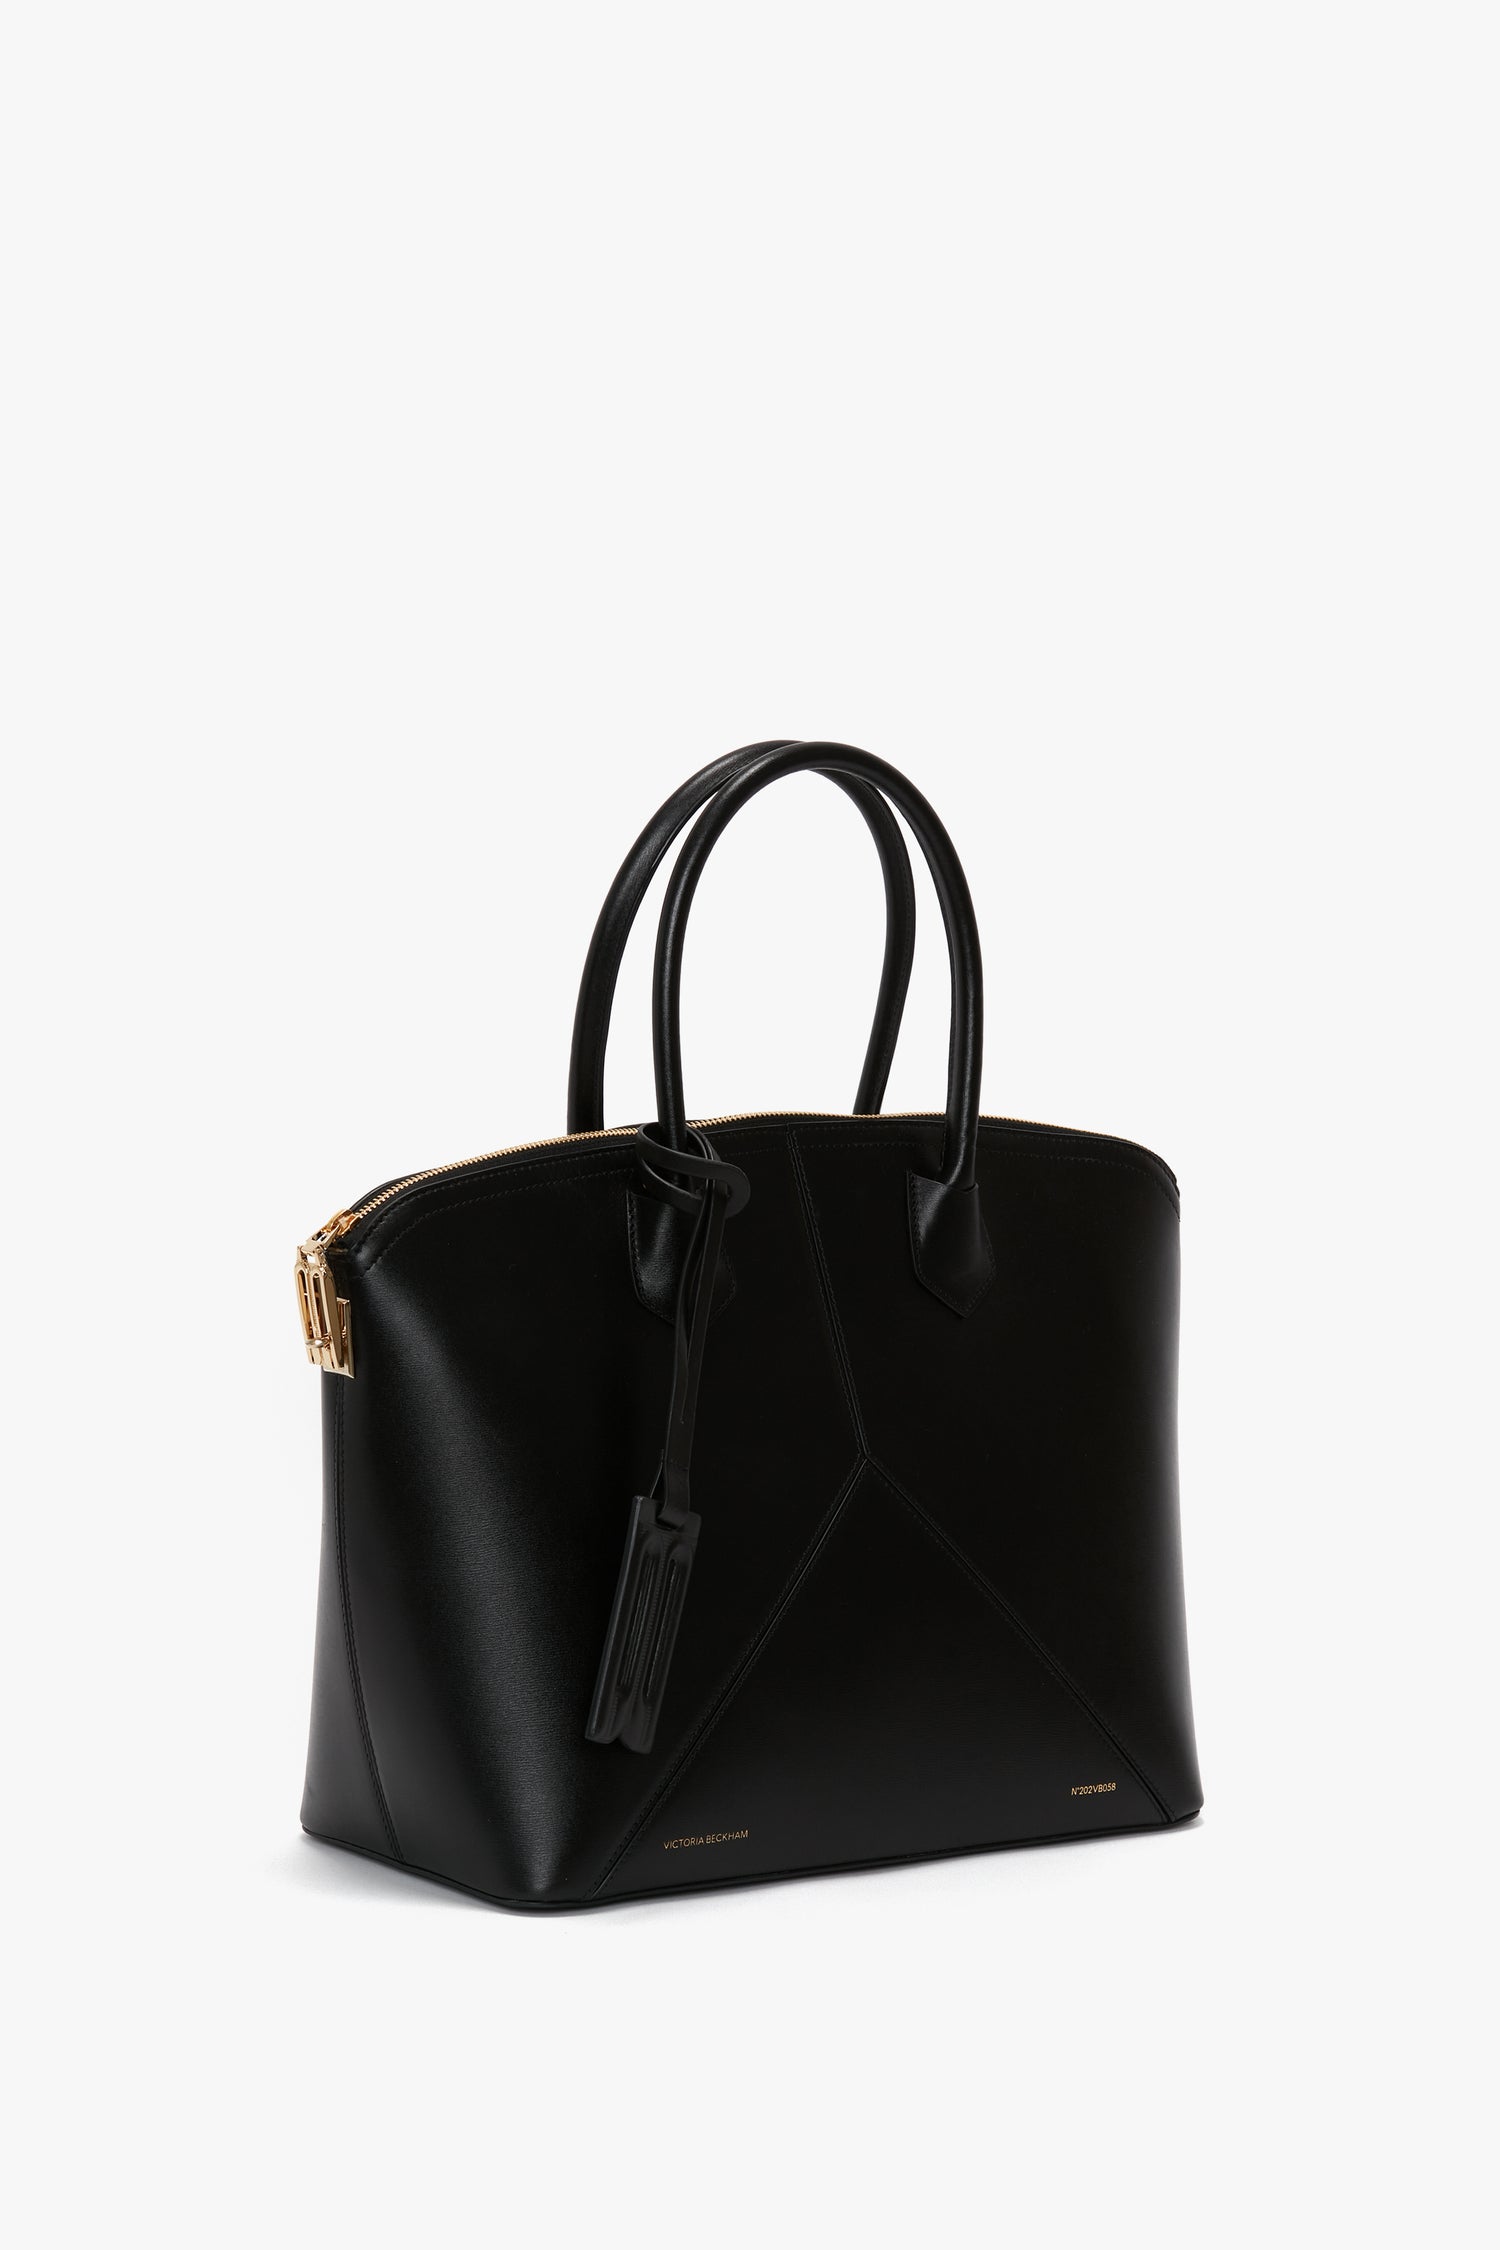 The versatile hold-all, the Victoria Bag In Black Leather by Victoria Beckham, features black leather panels, two handles, and a gold zipper. Its structured, angular design is complemented by a small luggage tag attached for added flair.